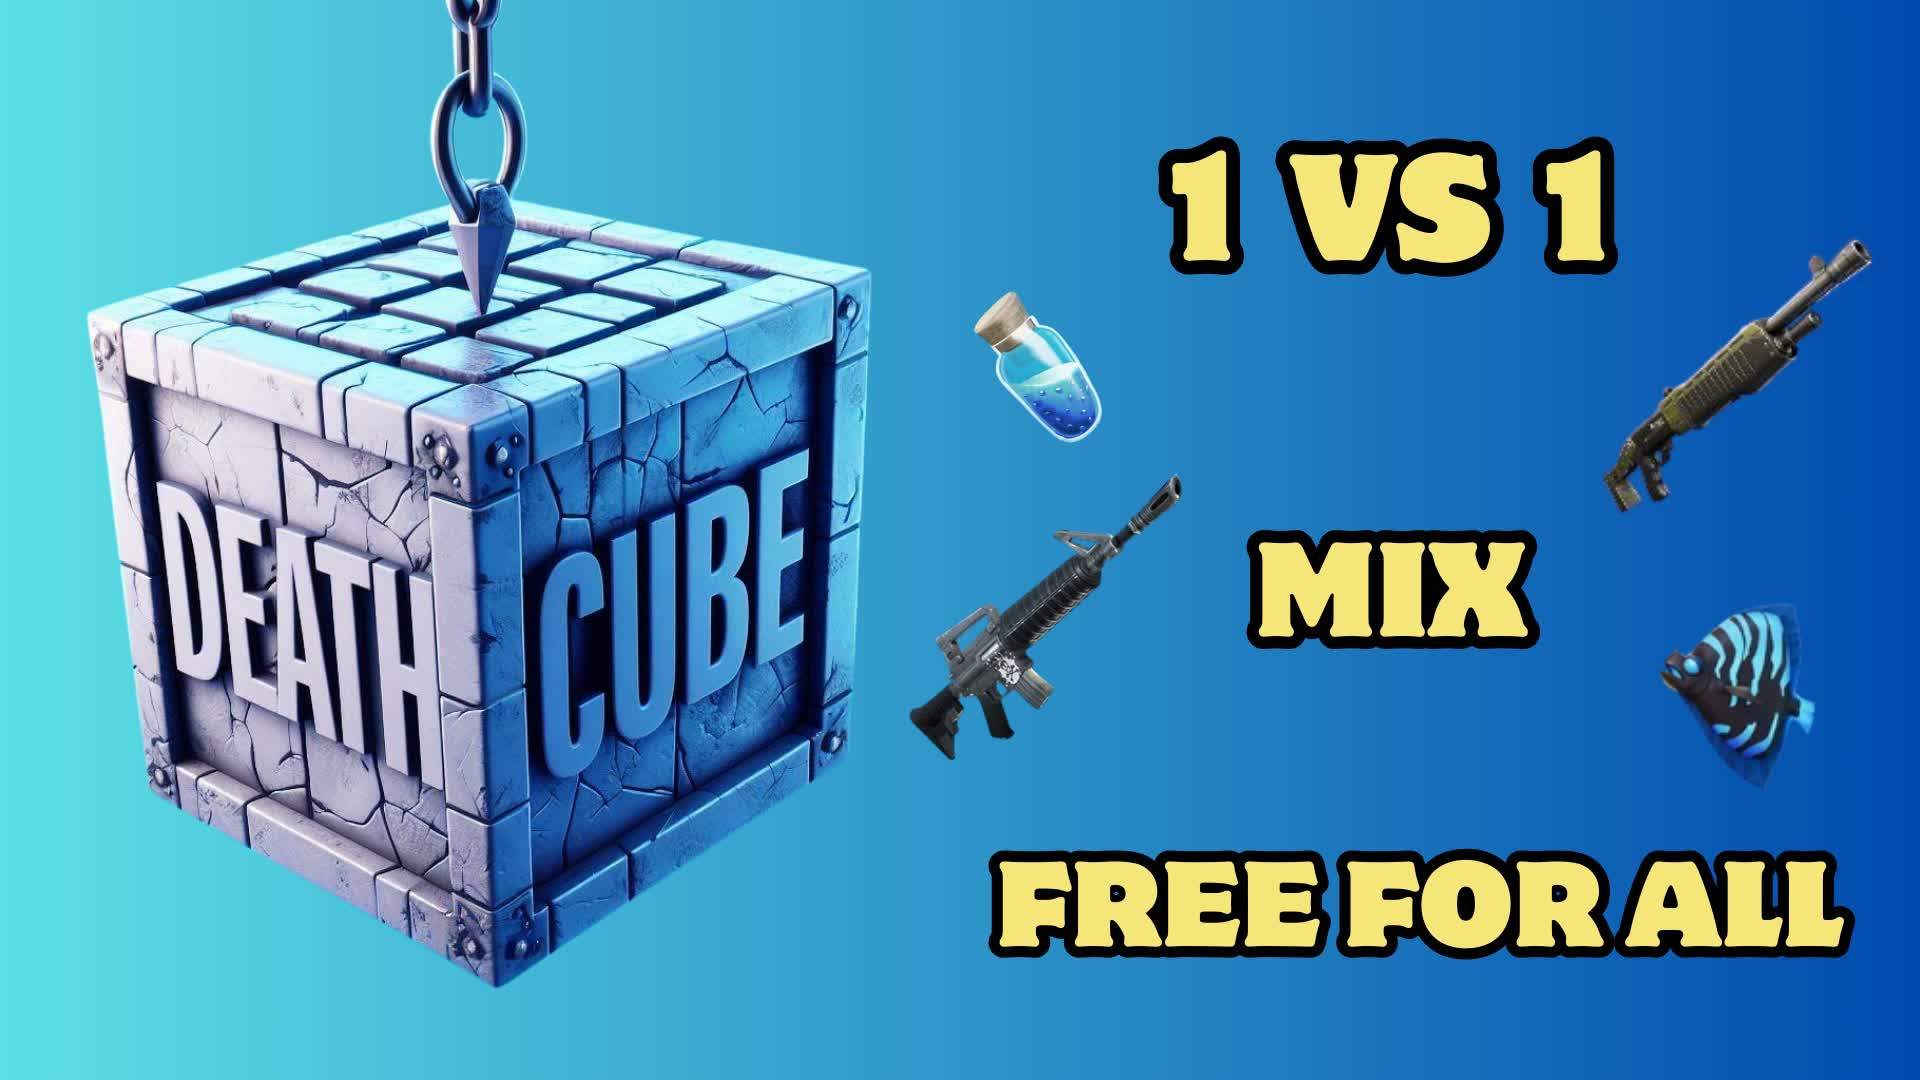 DEATHCUBE - 1 VS 1 MIX FREE FOR ALL